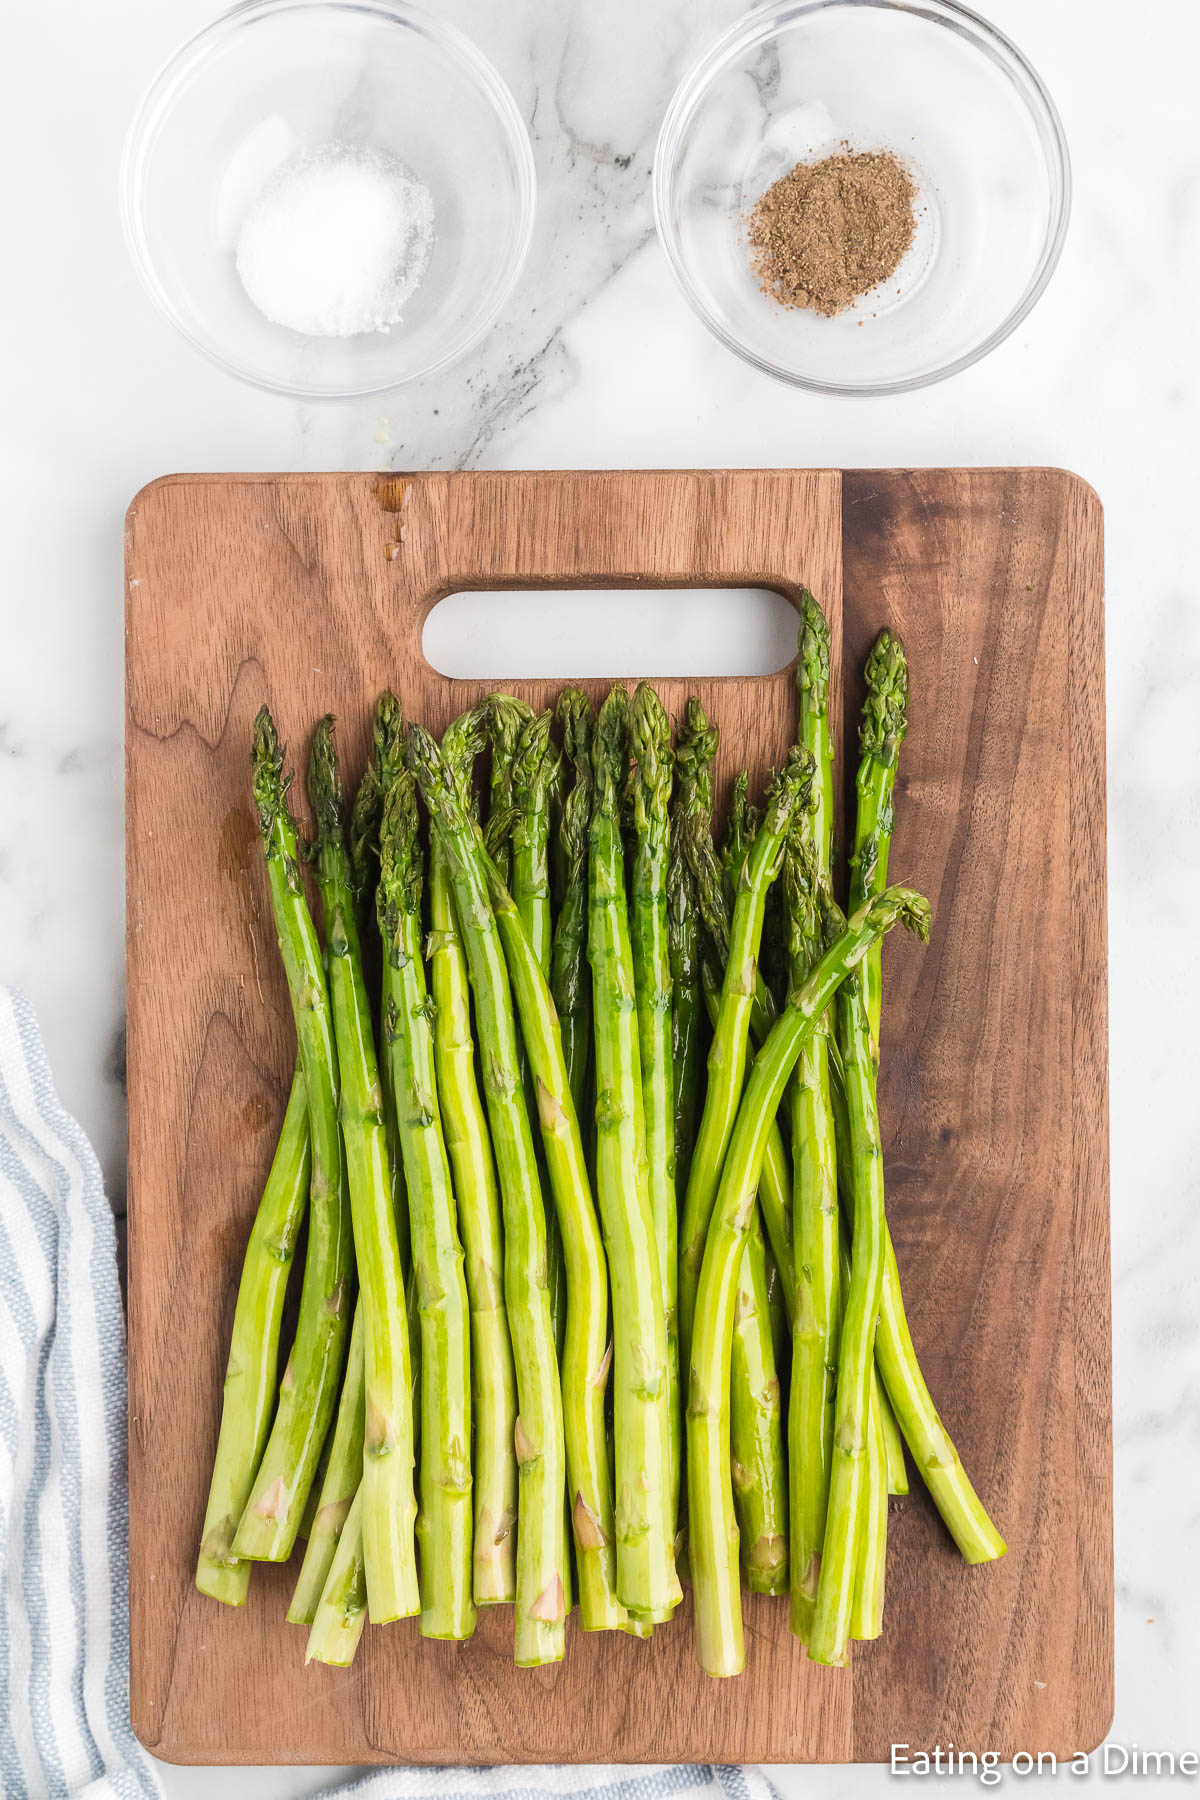 Asparagus on a cutting board with bowls of salt and pepper